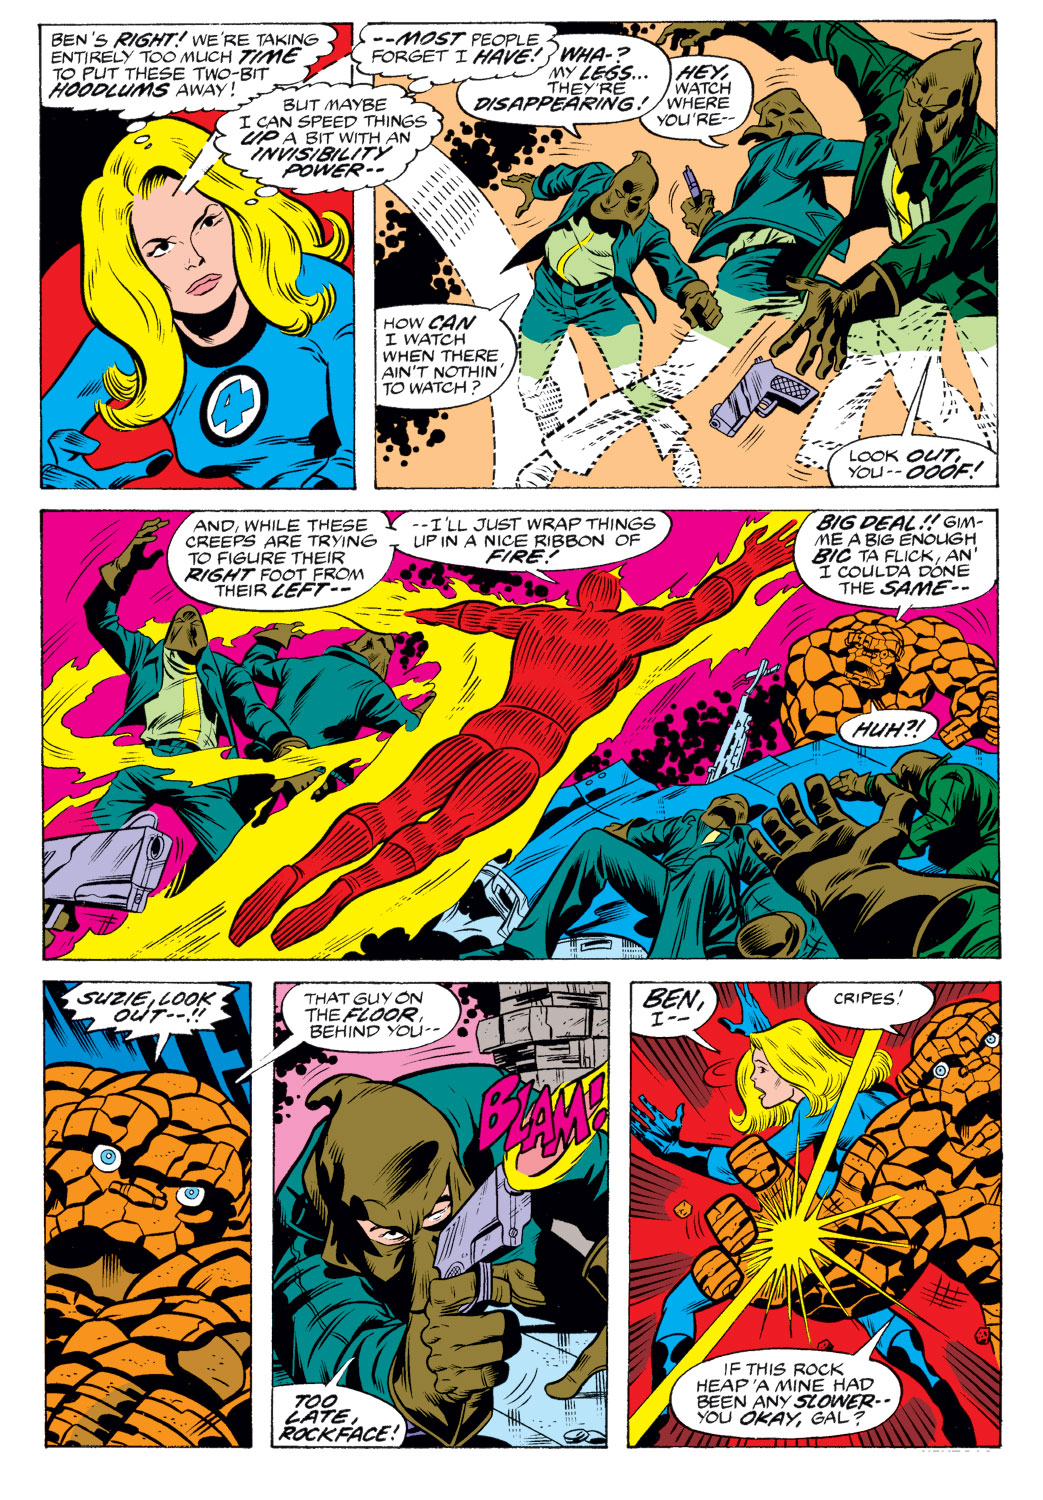 What If? (1977) issue 6 - The Fantastic Four had different superpowers - Page 4